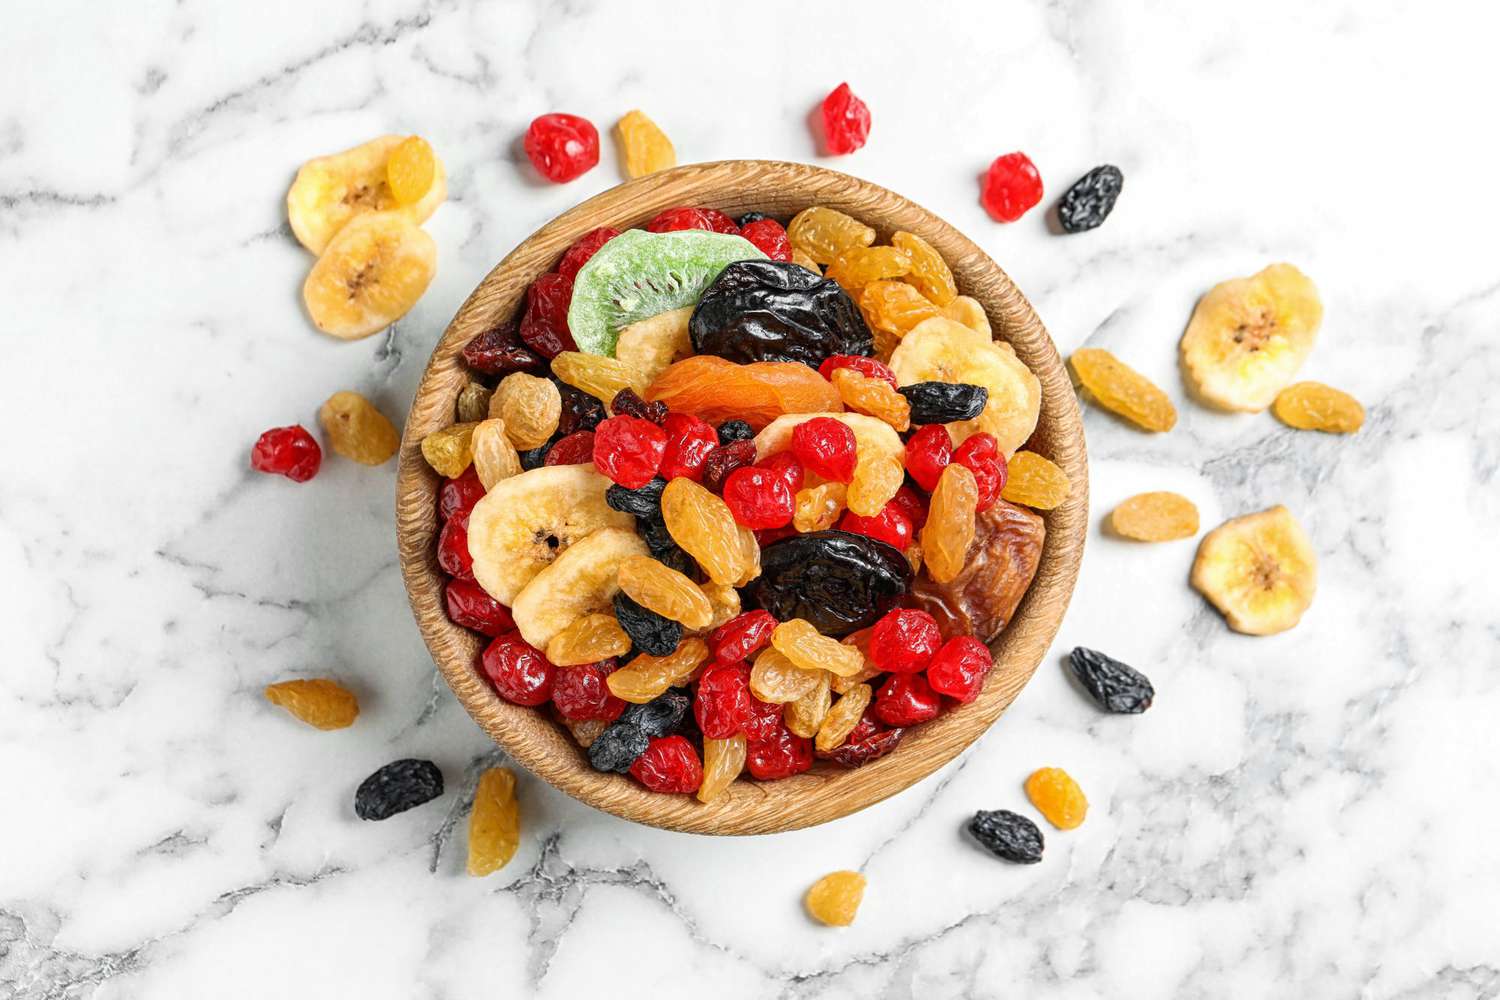 Is Dried Fruit Actually a Healthy Snack?